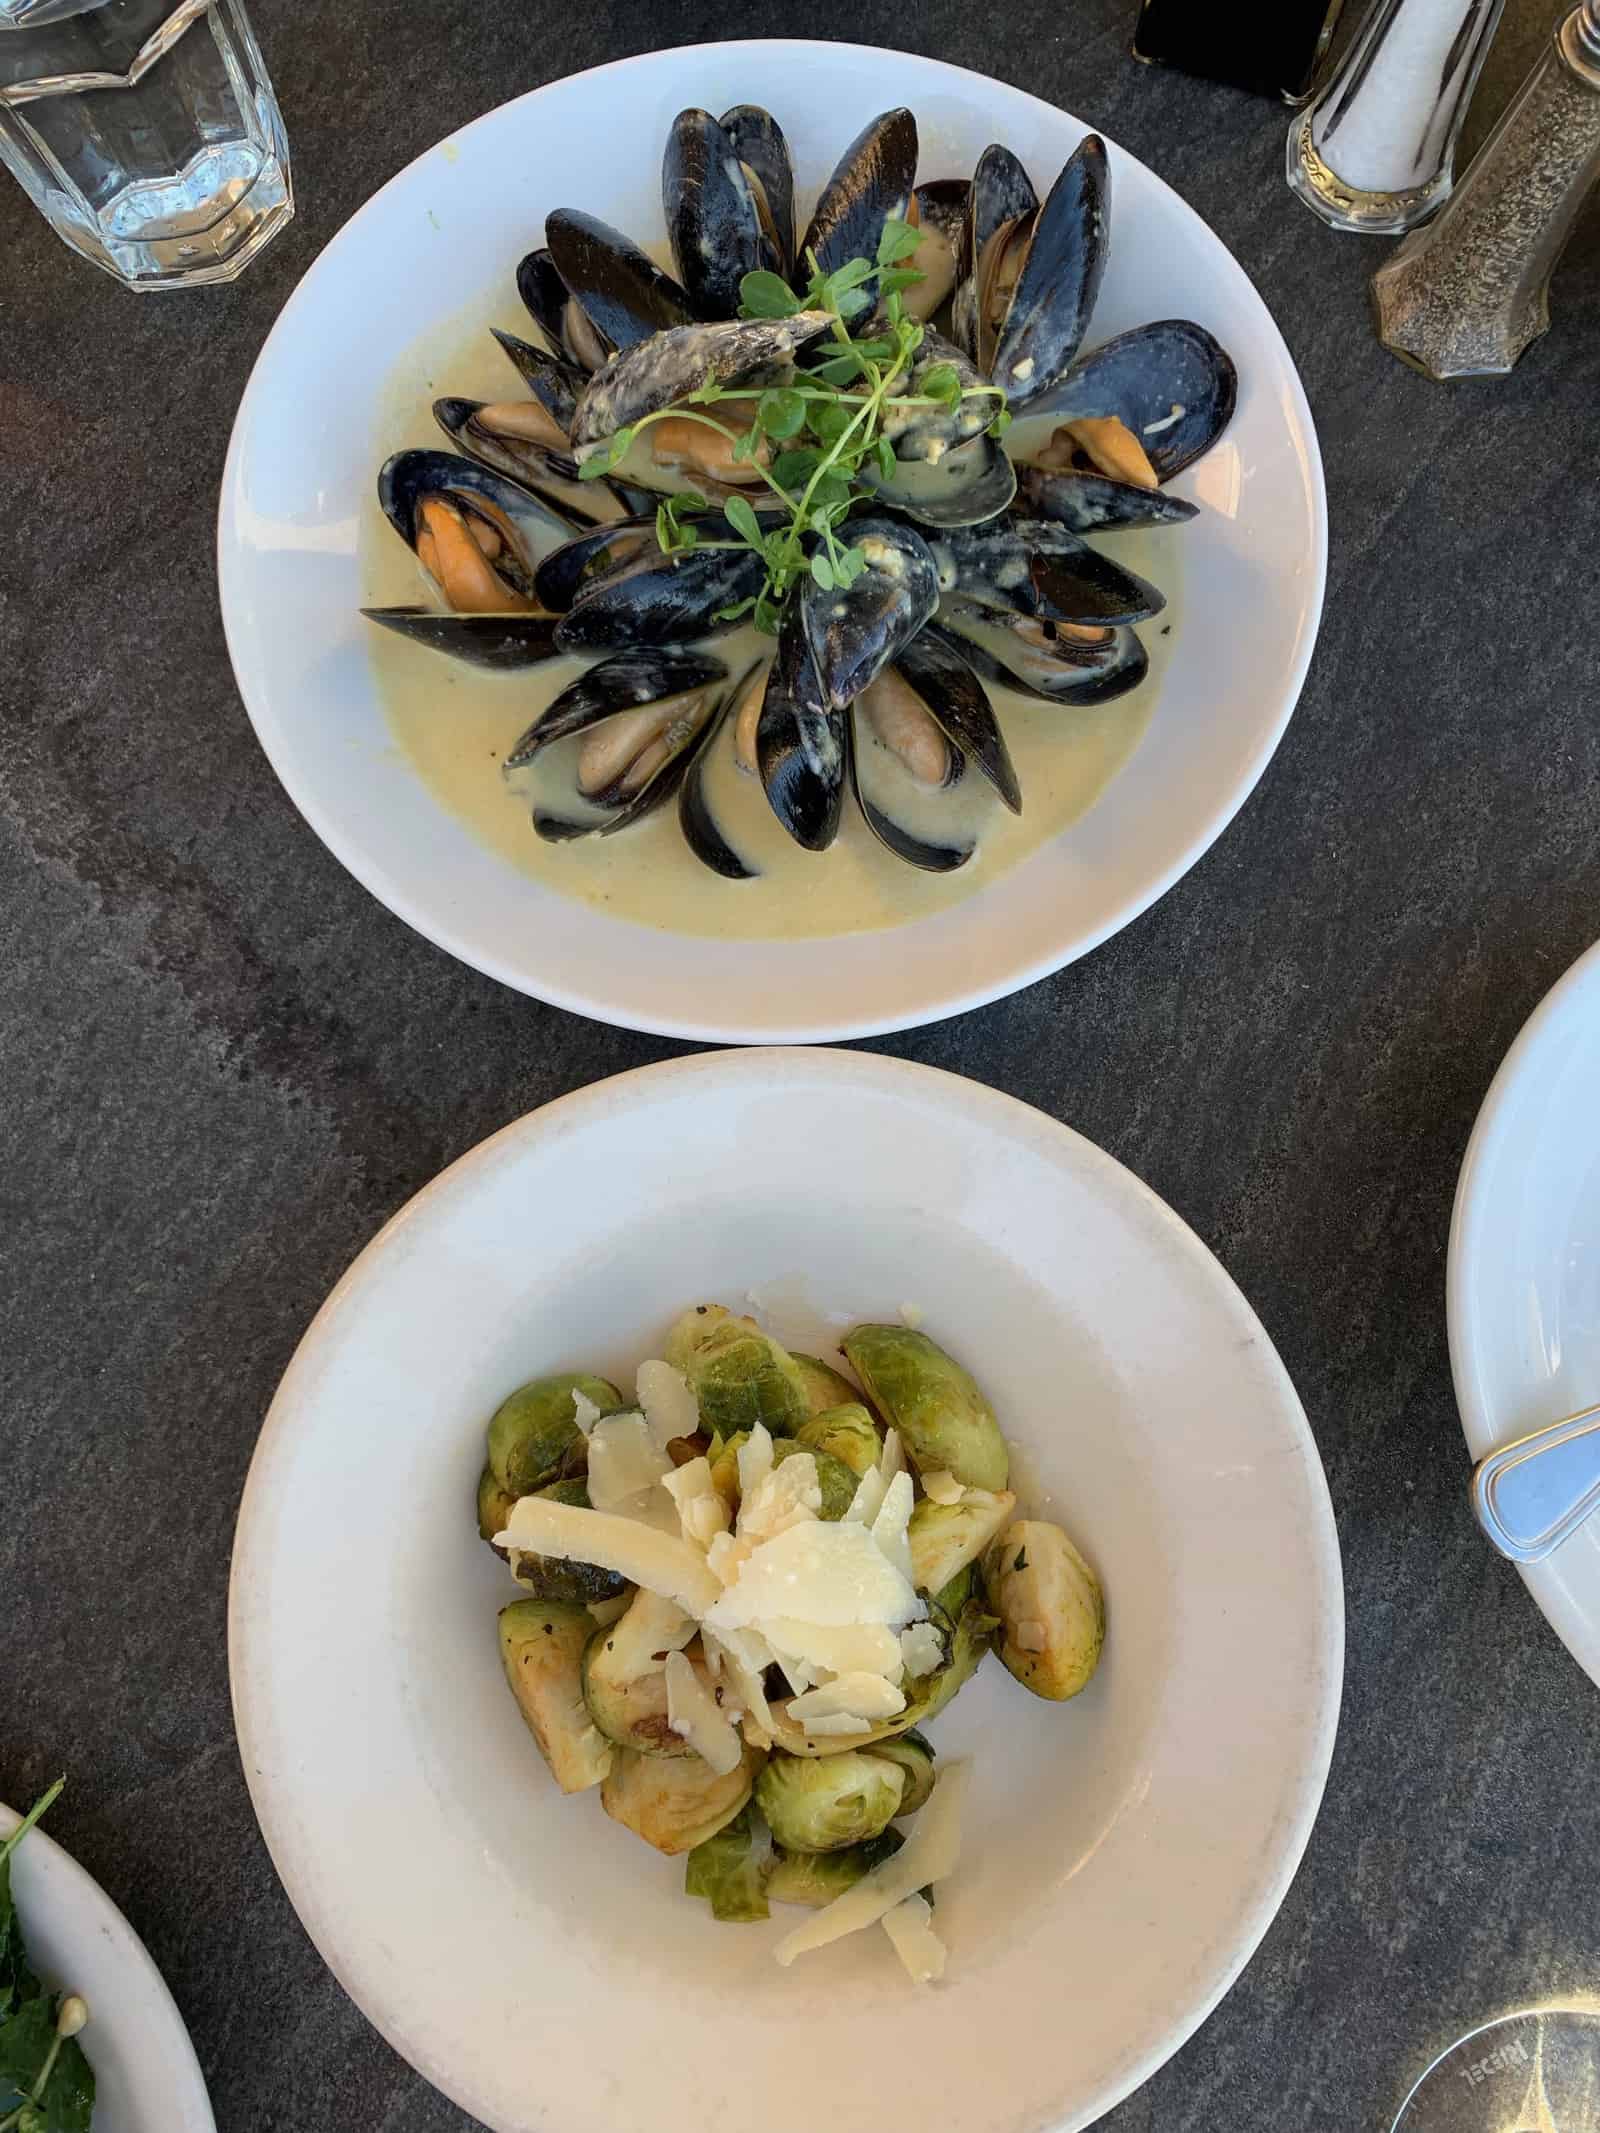 Mussels at Servino in Tiburon